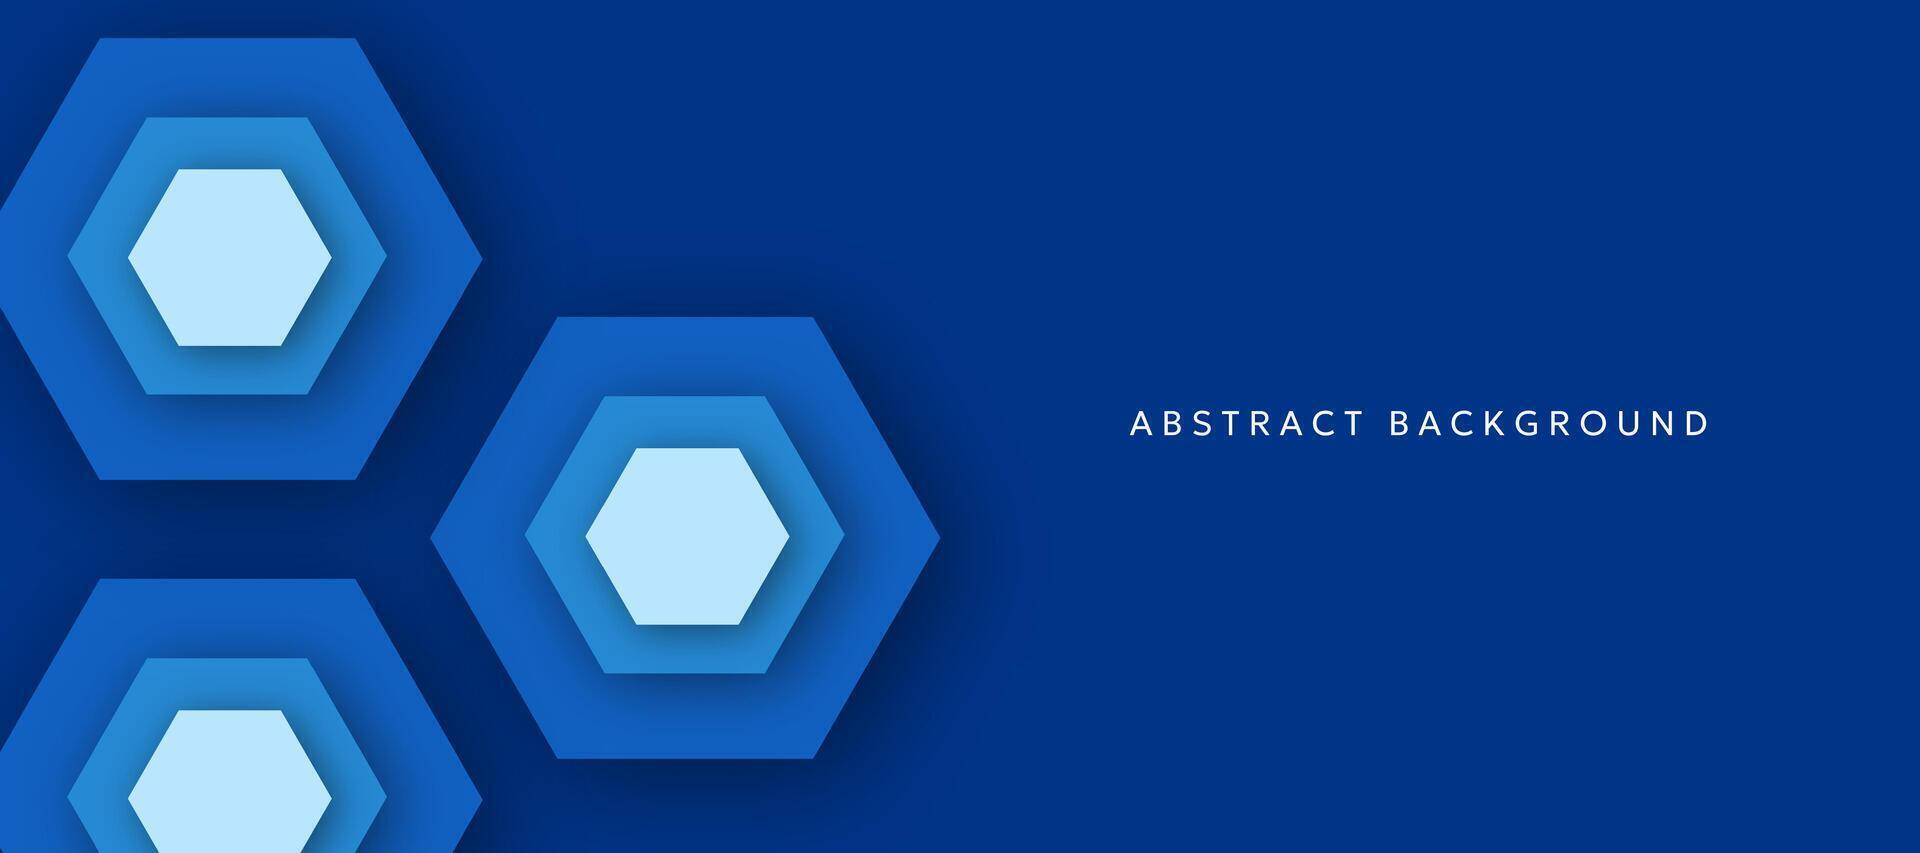 Blue hexagonal abstract three-dimensional background vector